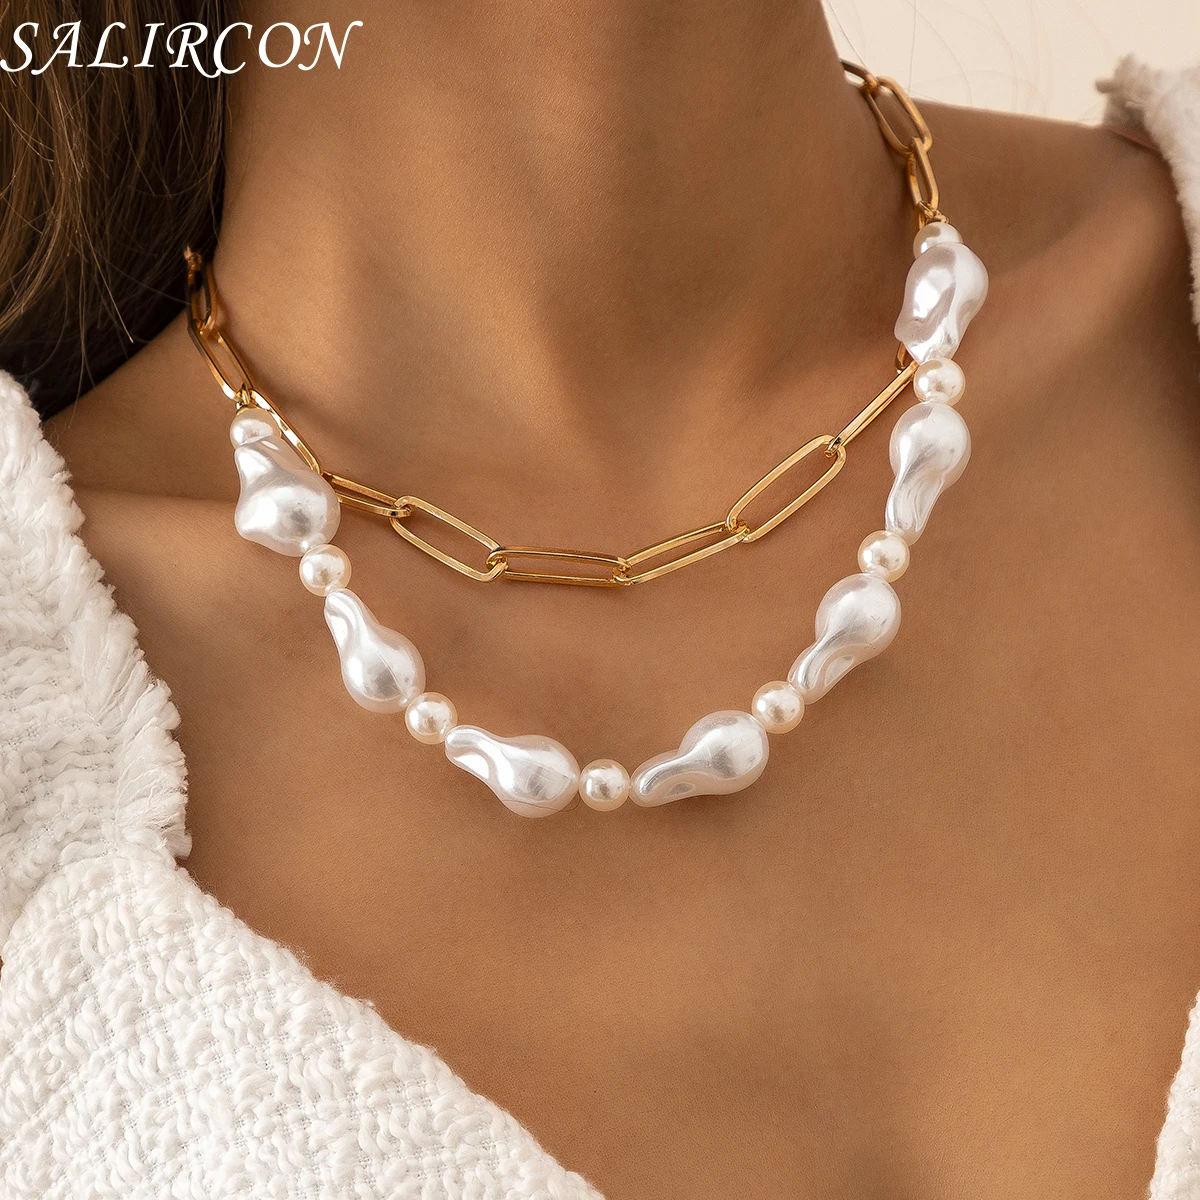 

Fashion Retro Baroque Simulated pearls Pendant Necklaces for Women Punk Multilayer Choker Collier Wedding Jewelry Kpop New 2021